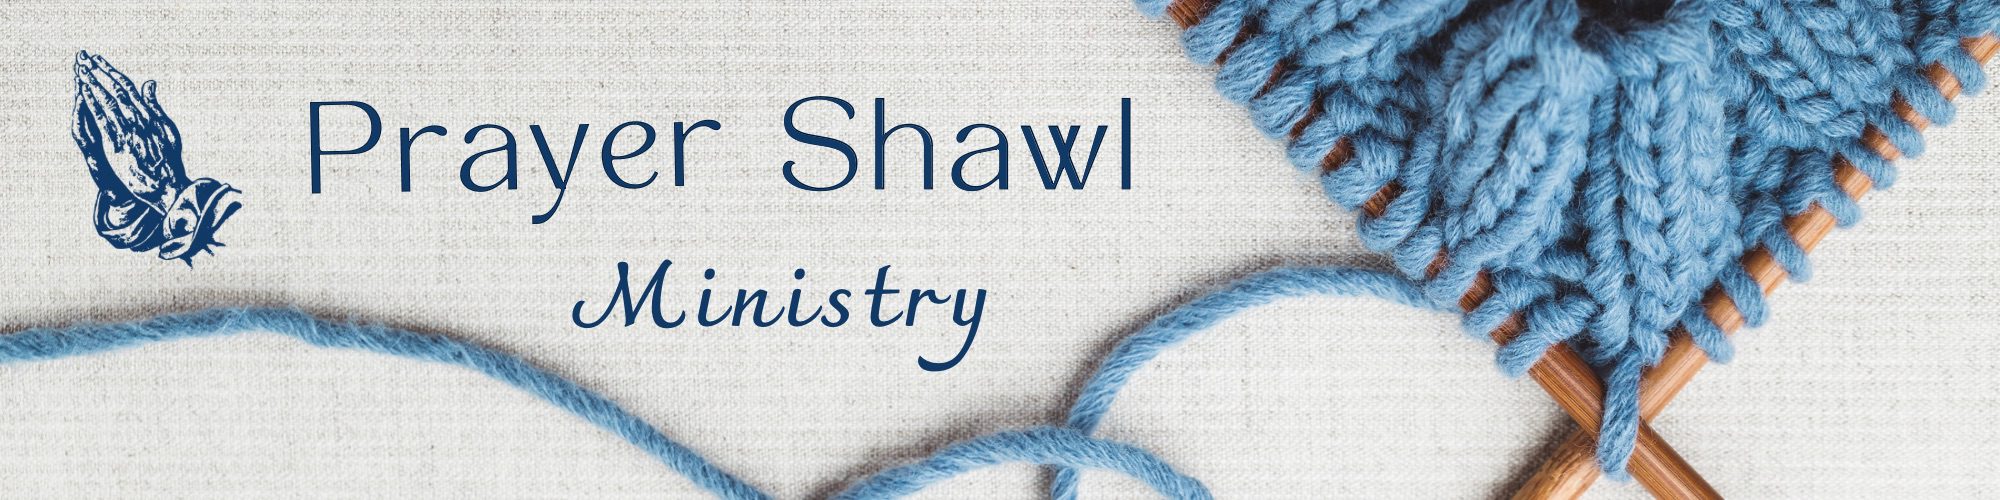 Prayer Shawl Ministry  SAINT GREGORY THE GREAT CATHOLIC CHURCH AND SCHOOL